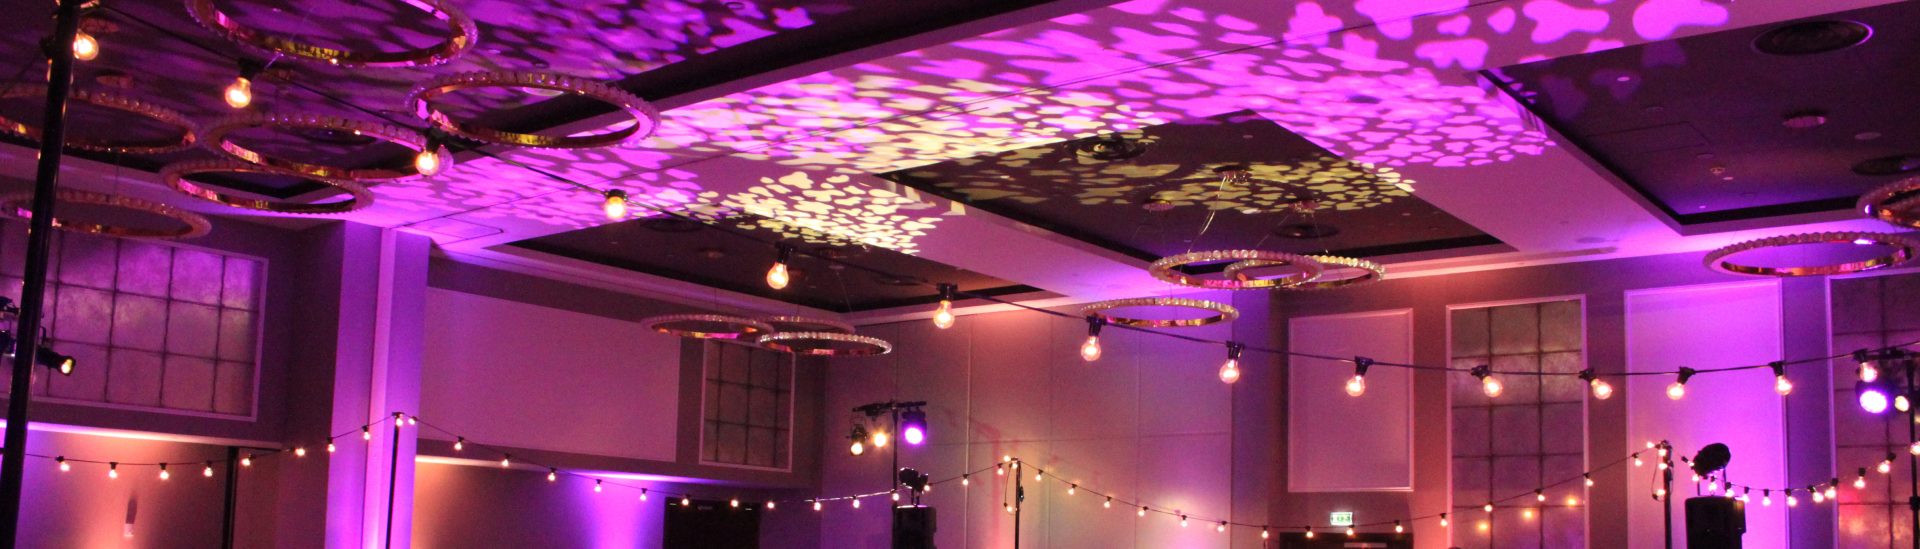 cropped-Corporate-Party-Lighting-Hilton-Bournemouth-Hire-1.jpg